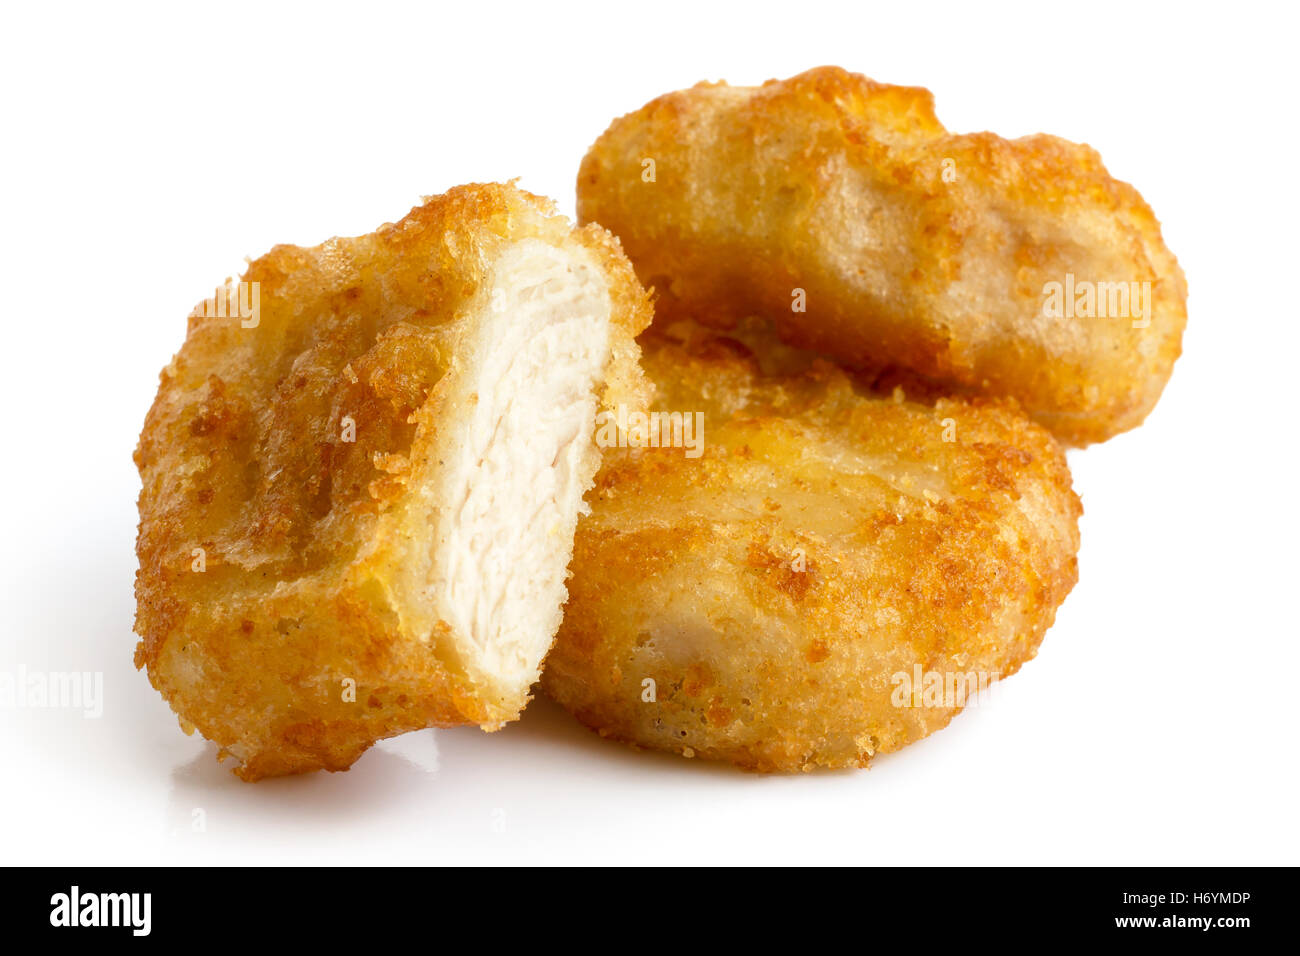 Three golden deep-fried battered chicken nuggets isolated on white in perspective. One cut with meat showing. Stock Photo